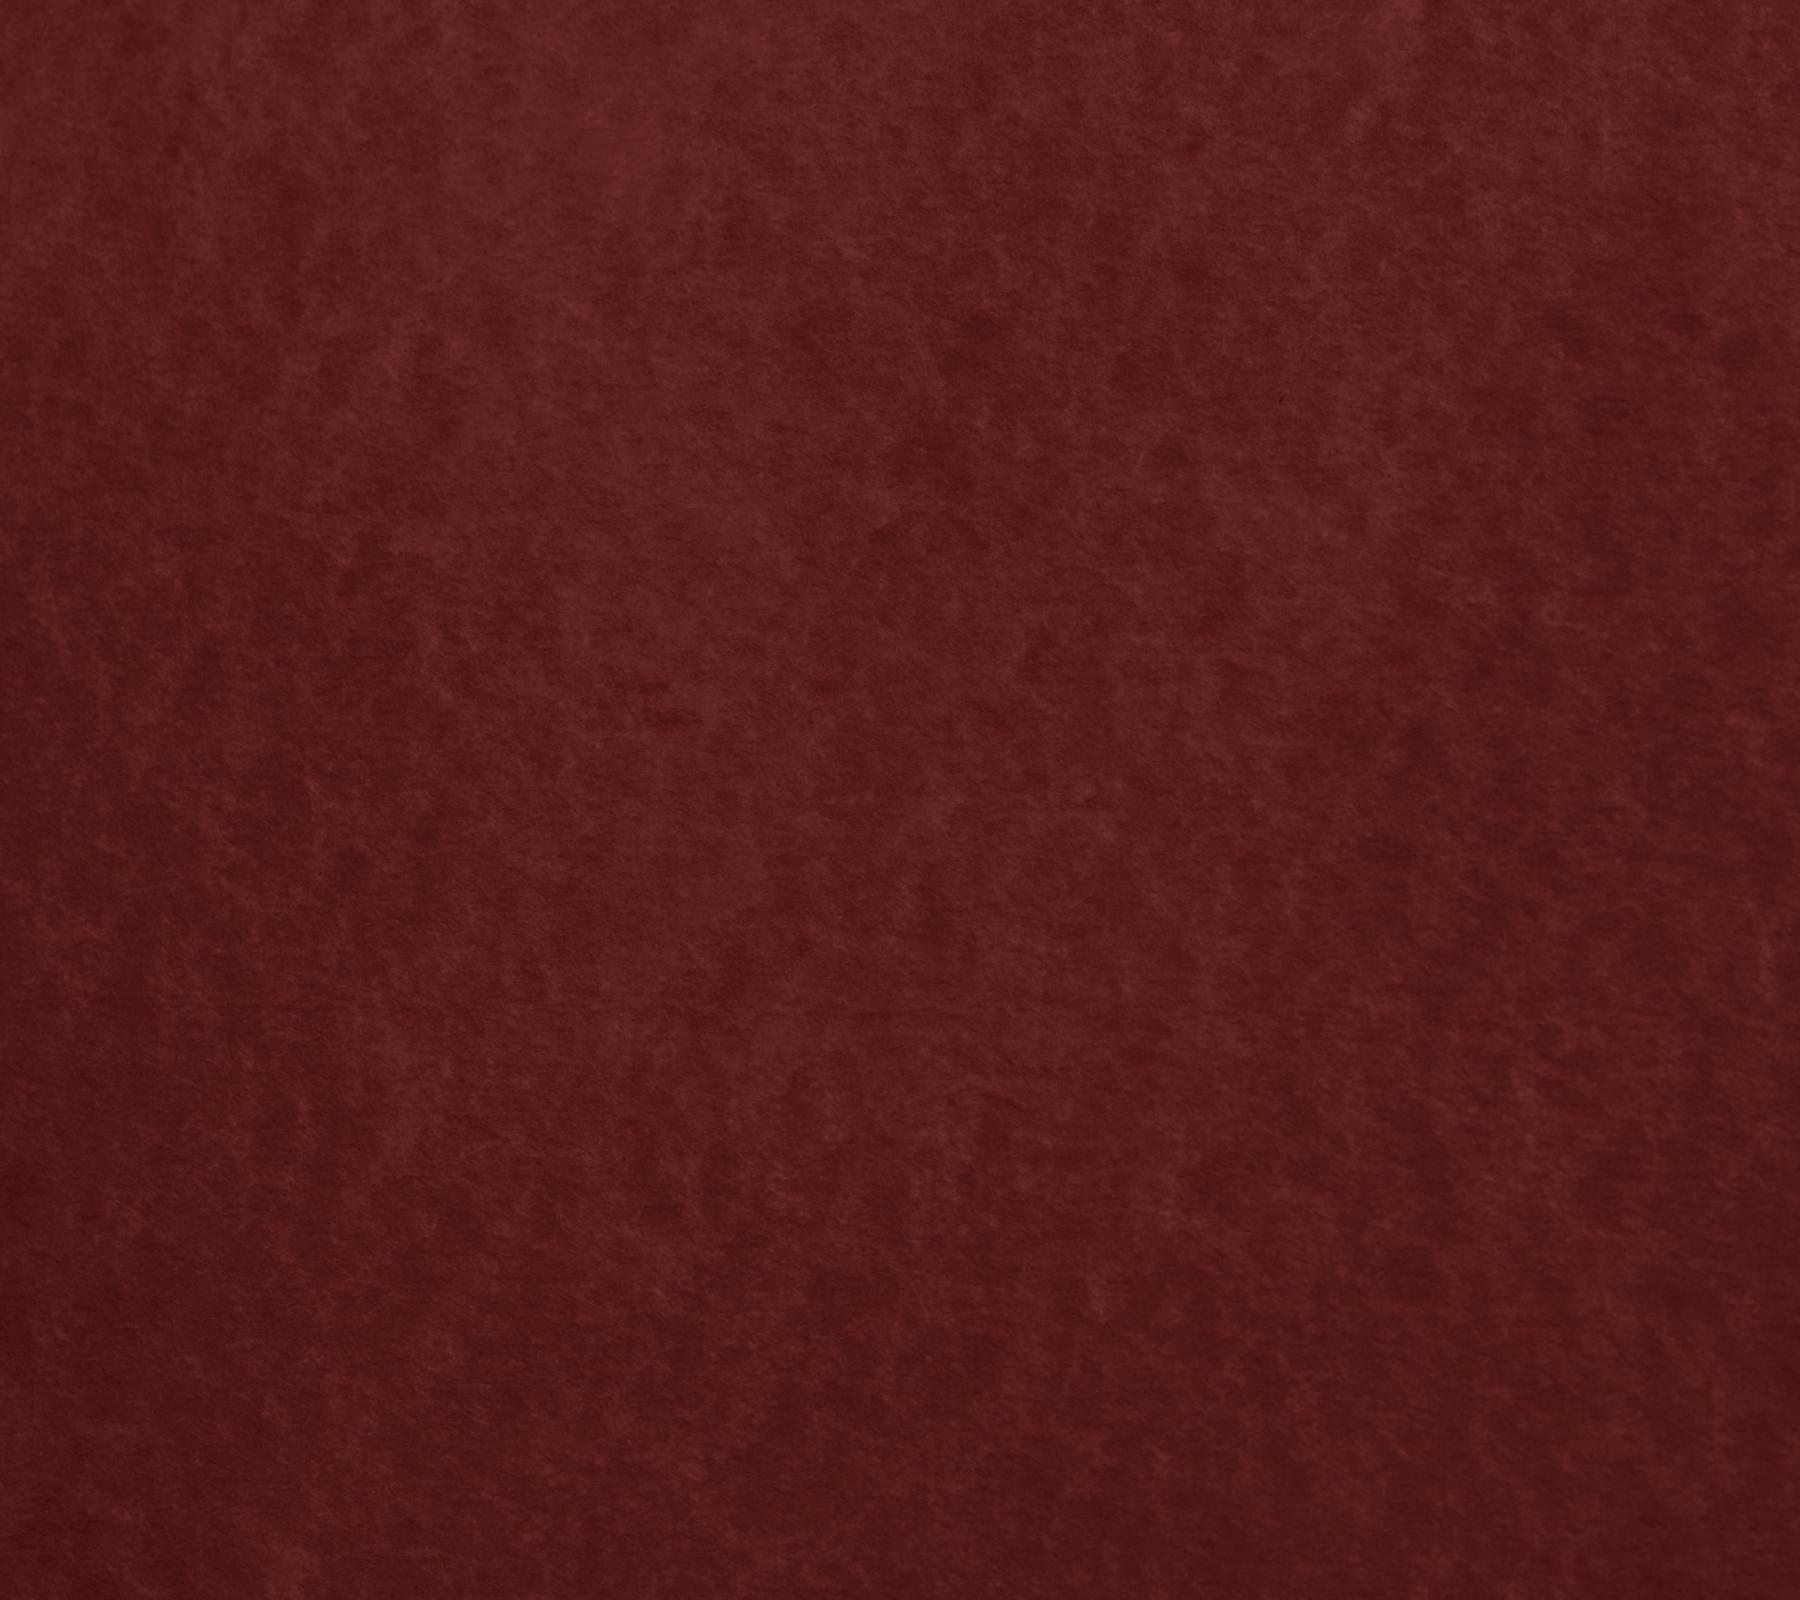 Solid Maroon Background